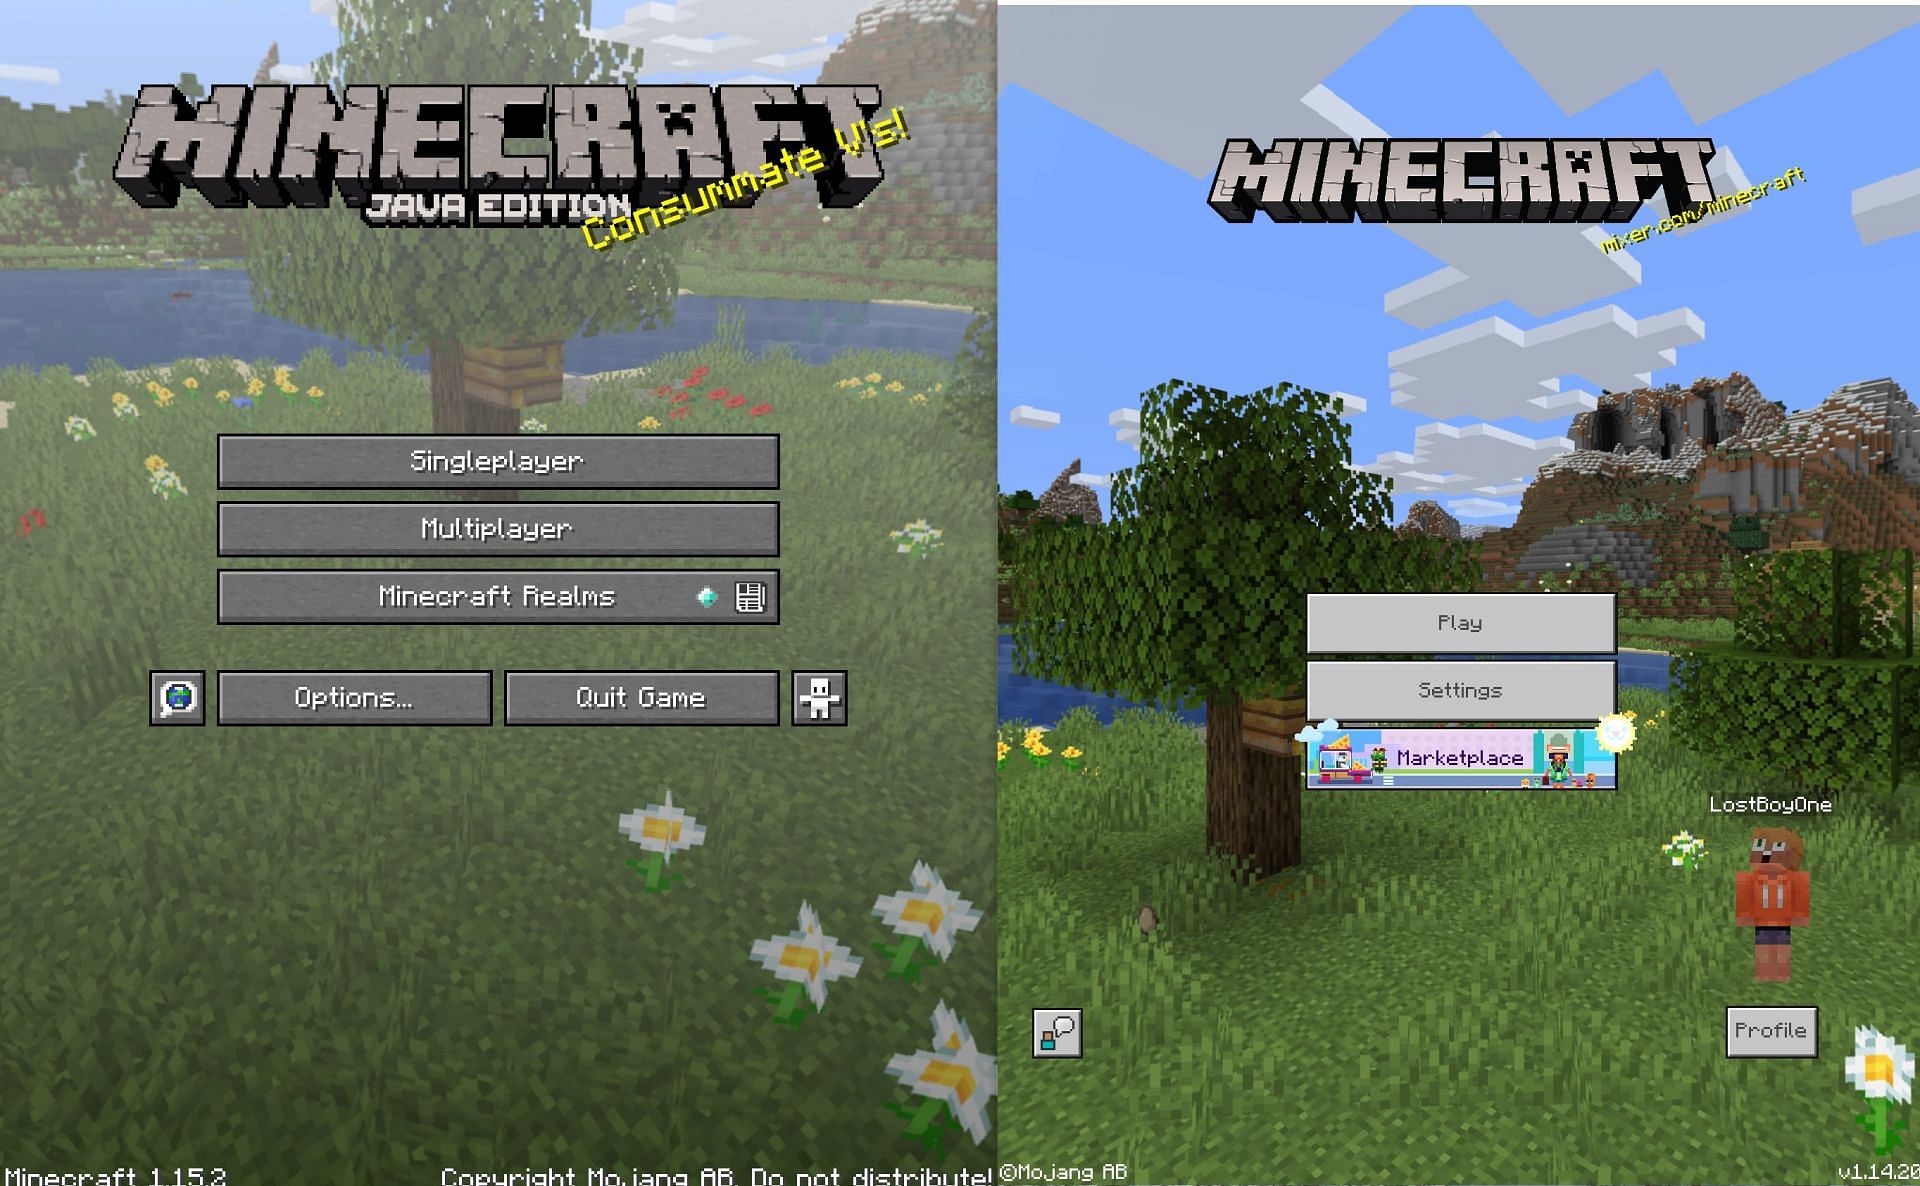 How to play Minecraft on all platforms in 2022